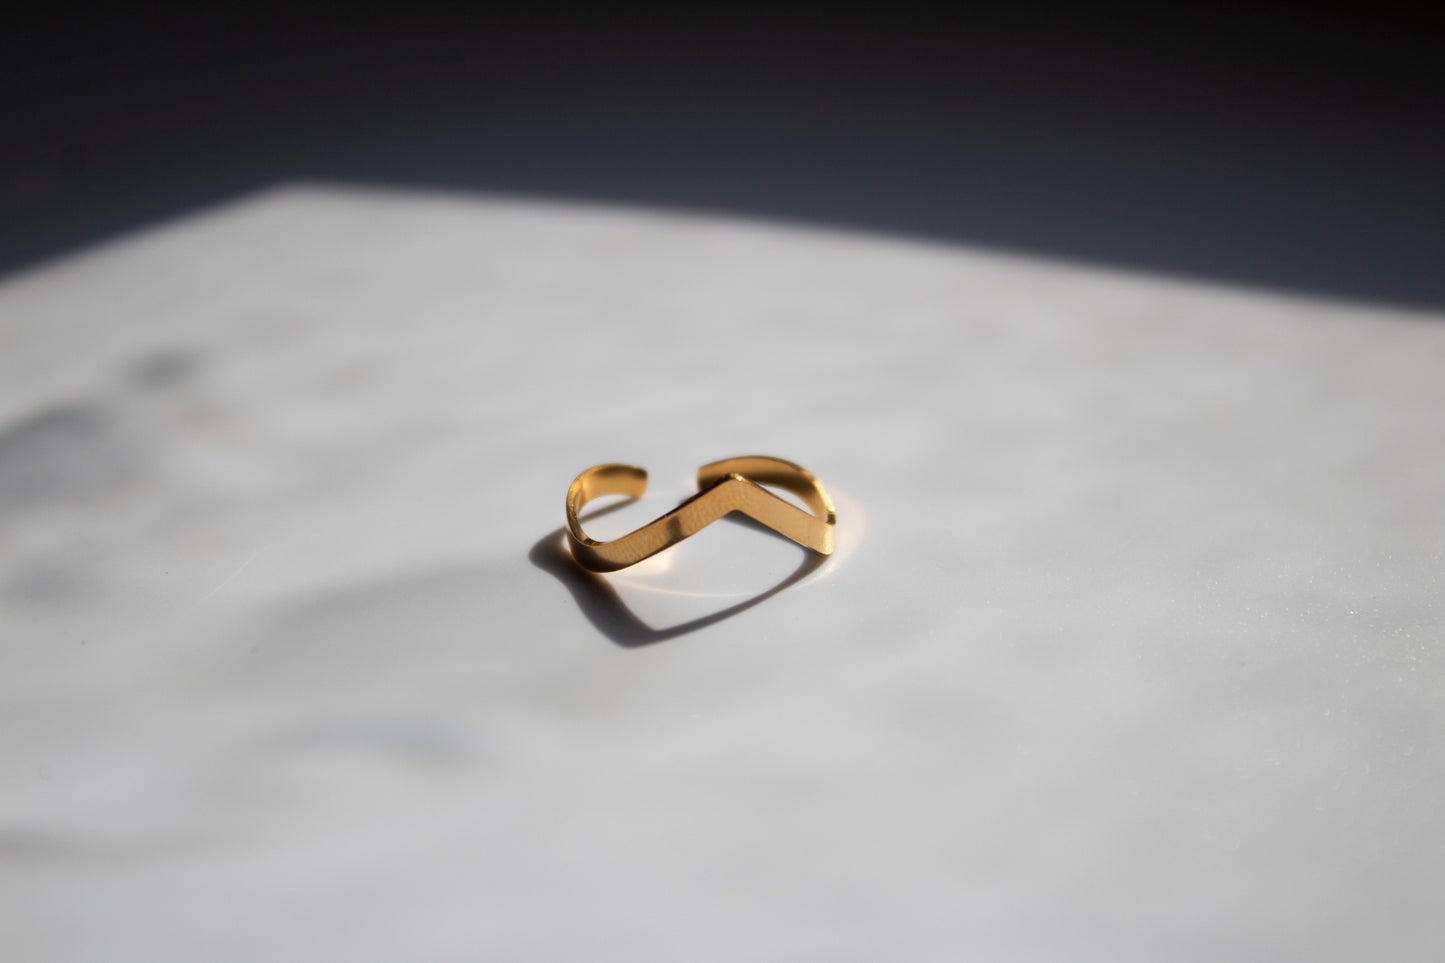 The Single Stack Open Back Ring